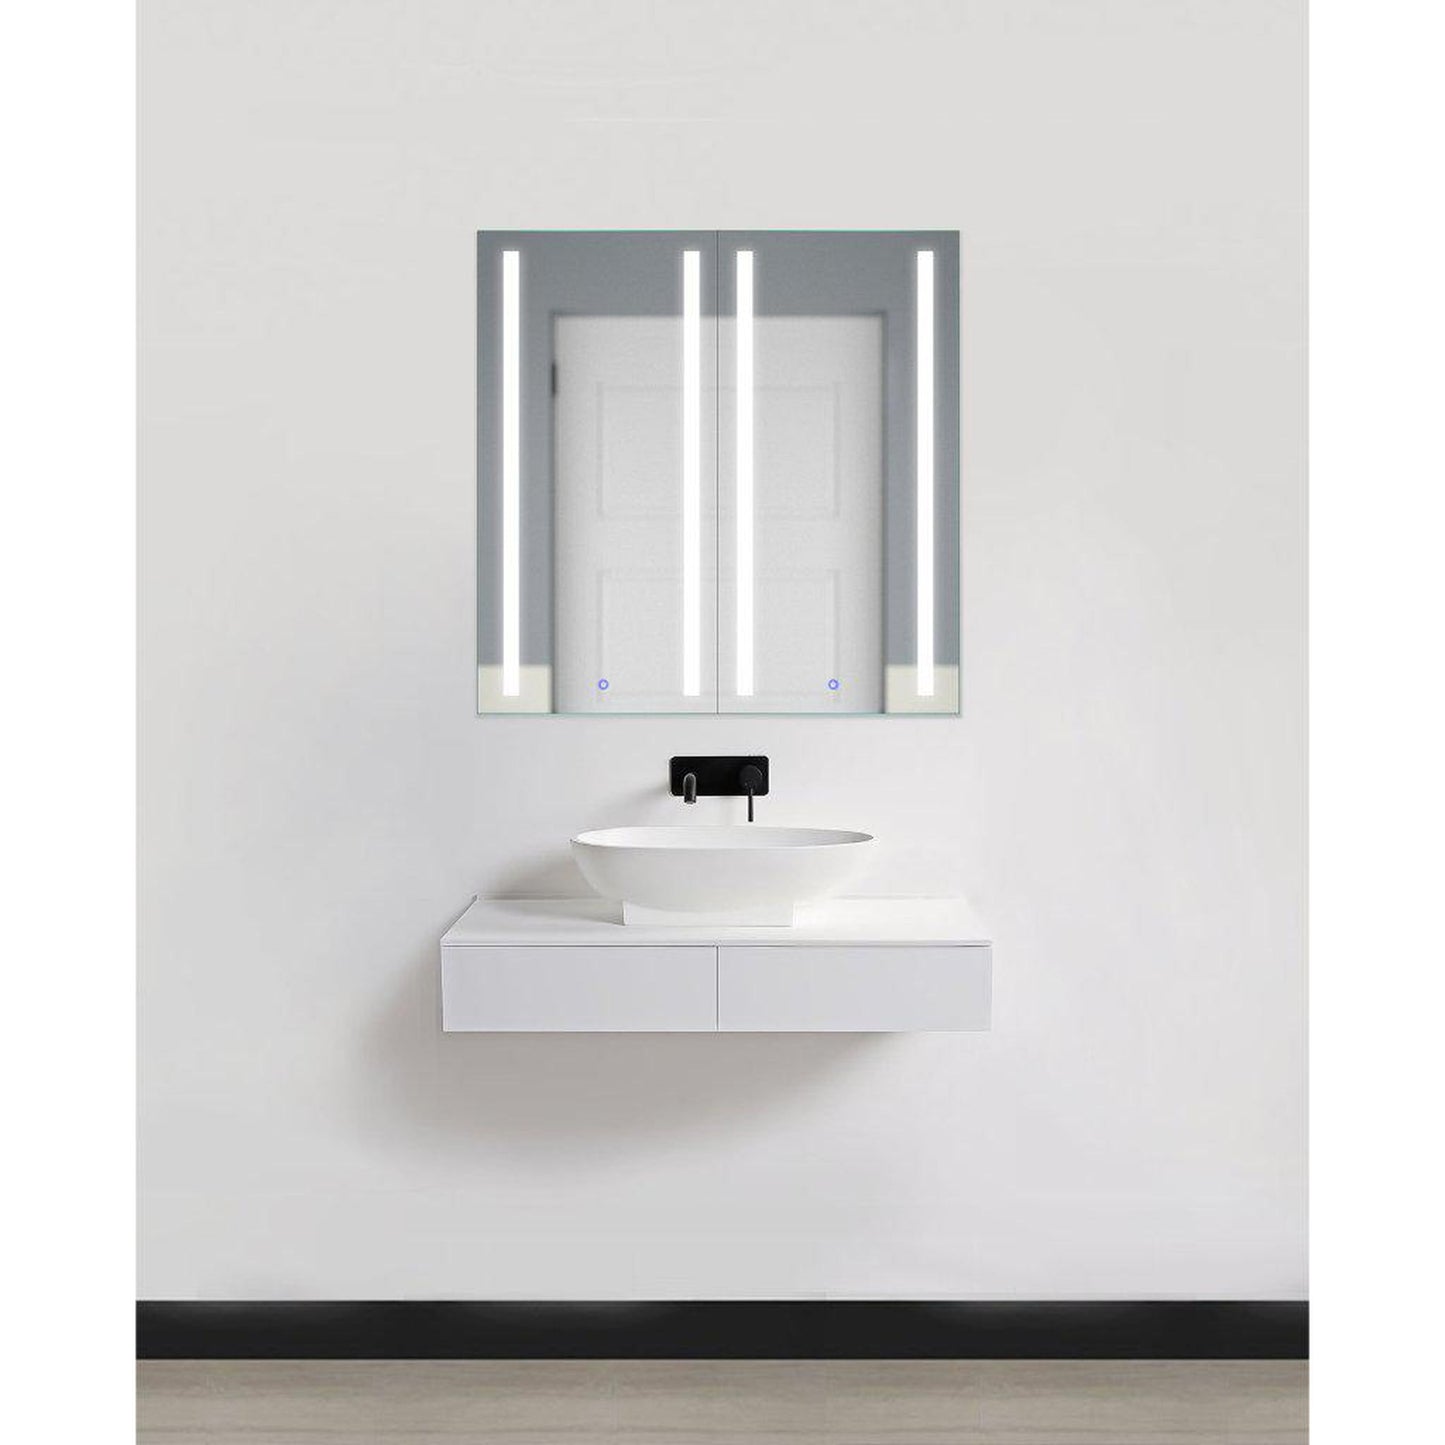 Krugg Reflections Kinetic 30" x 30" 6000K Double Dual Opening Rectangular Recessed/Surface-Mount Illuminated Silver Backed LED Medicine Cabinet Mirror With Built-in Defogger, Dimmer and Electrical Outlet